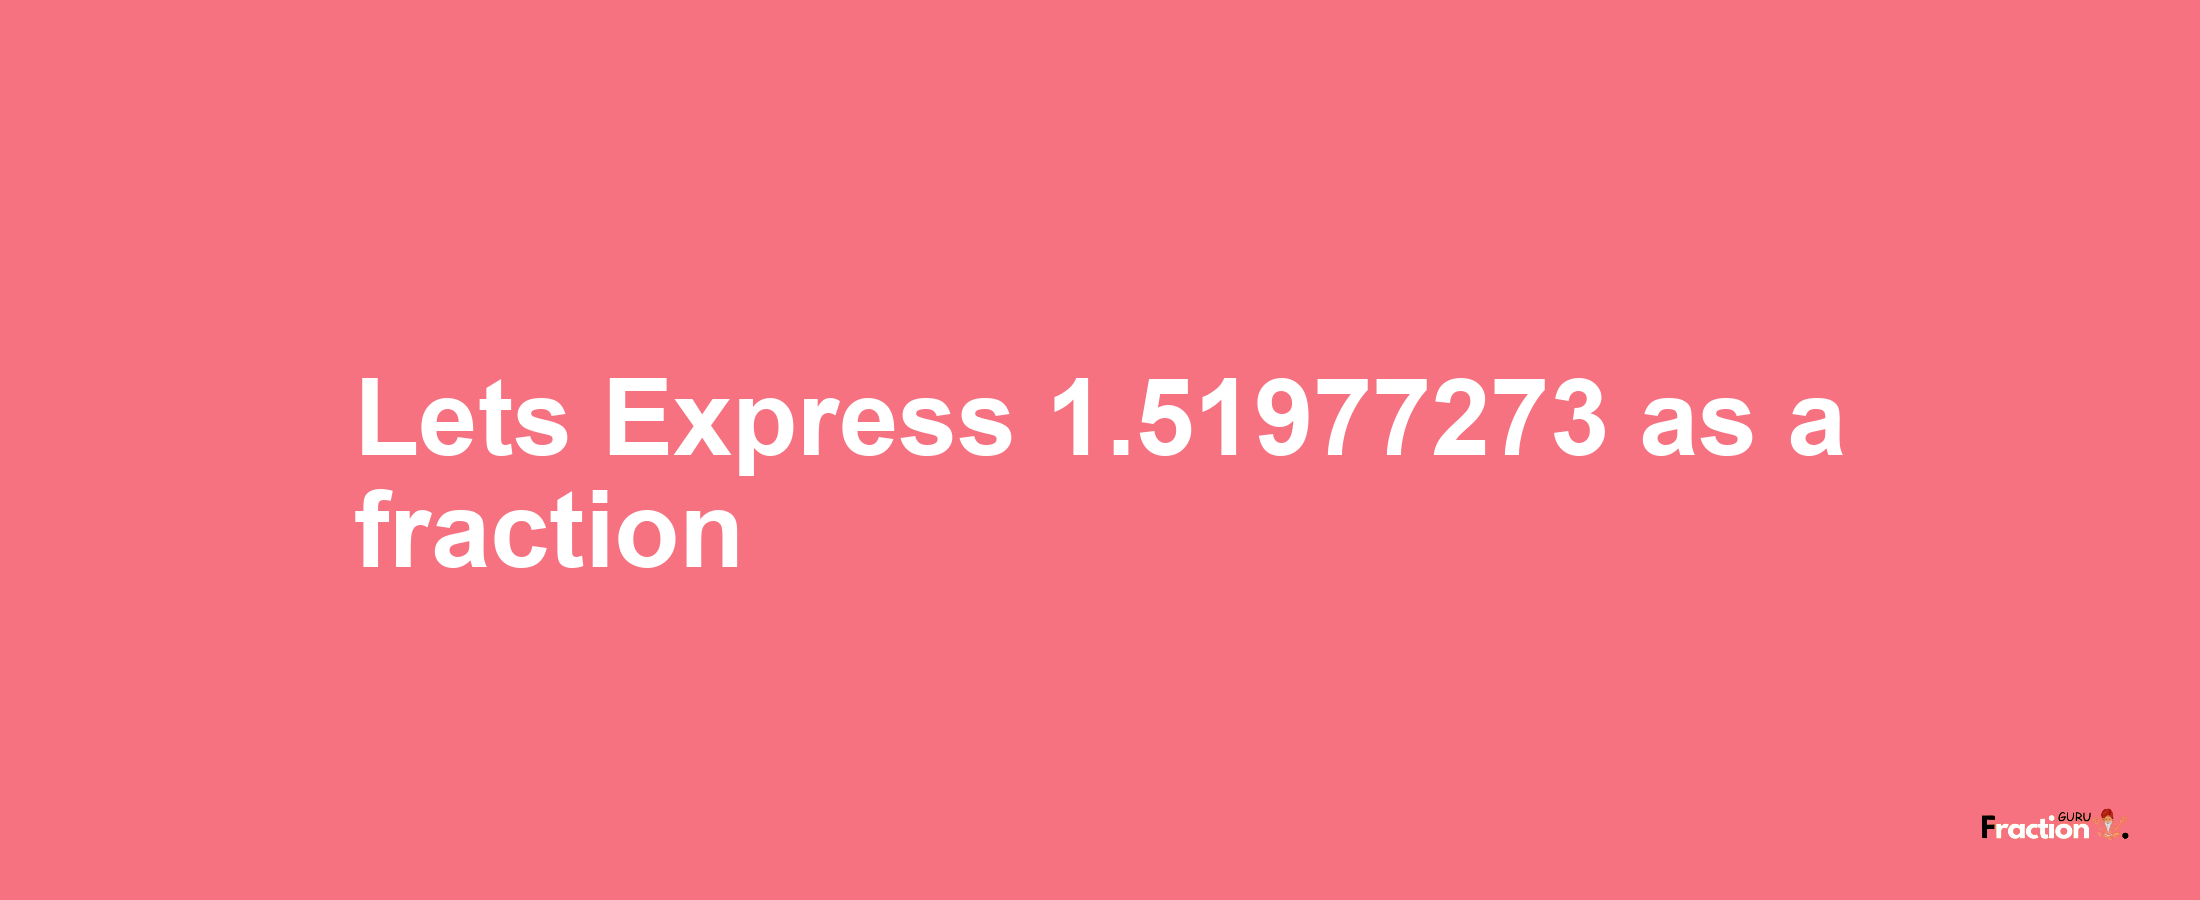 Lets Express 1.51977273 as afraction